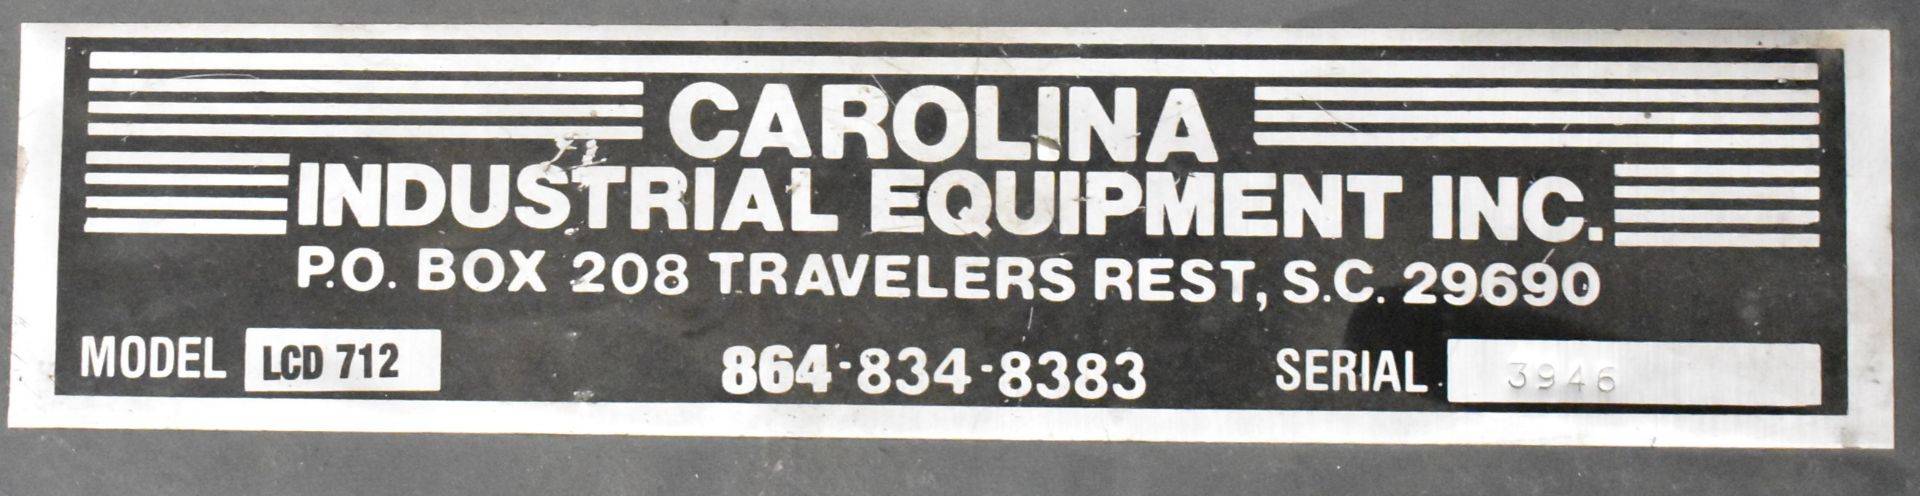 CAROLINA LCD 712 HORIZONTAL BAND SAW, S/N 3946 (LOCATED AT 1636 CHARLES ST, WHITBY, ON L1N 1B9) - Image 3 of 3